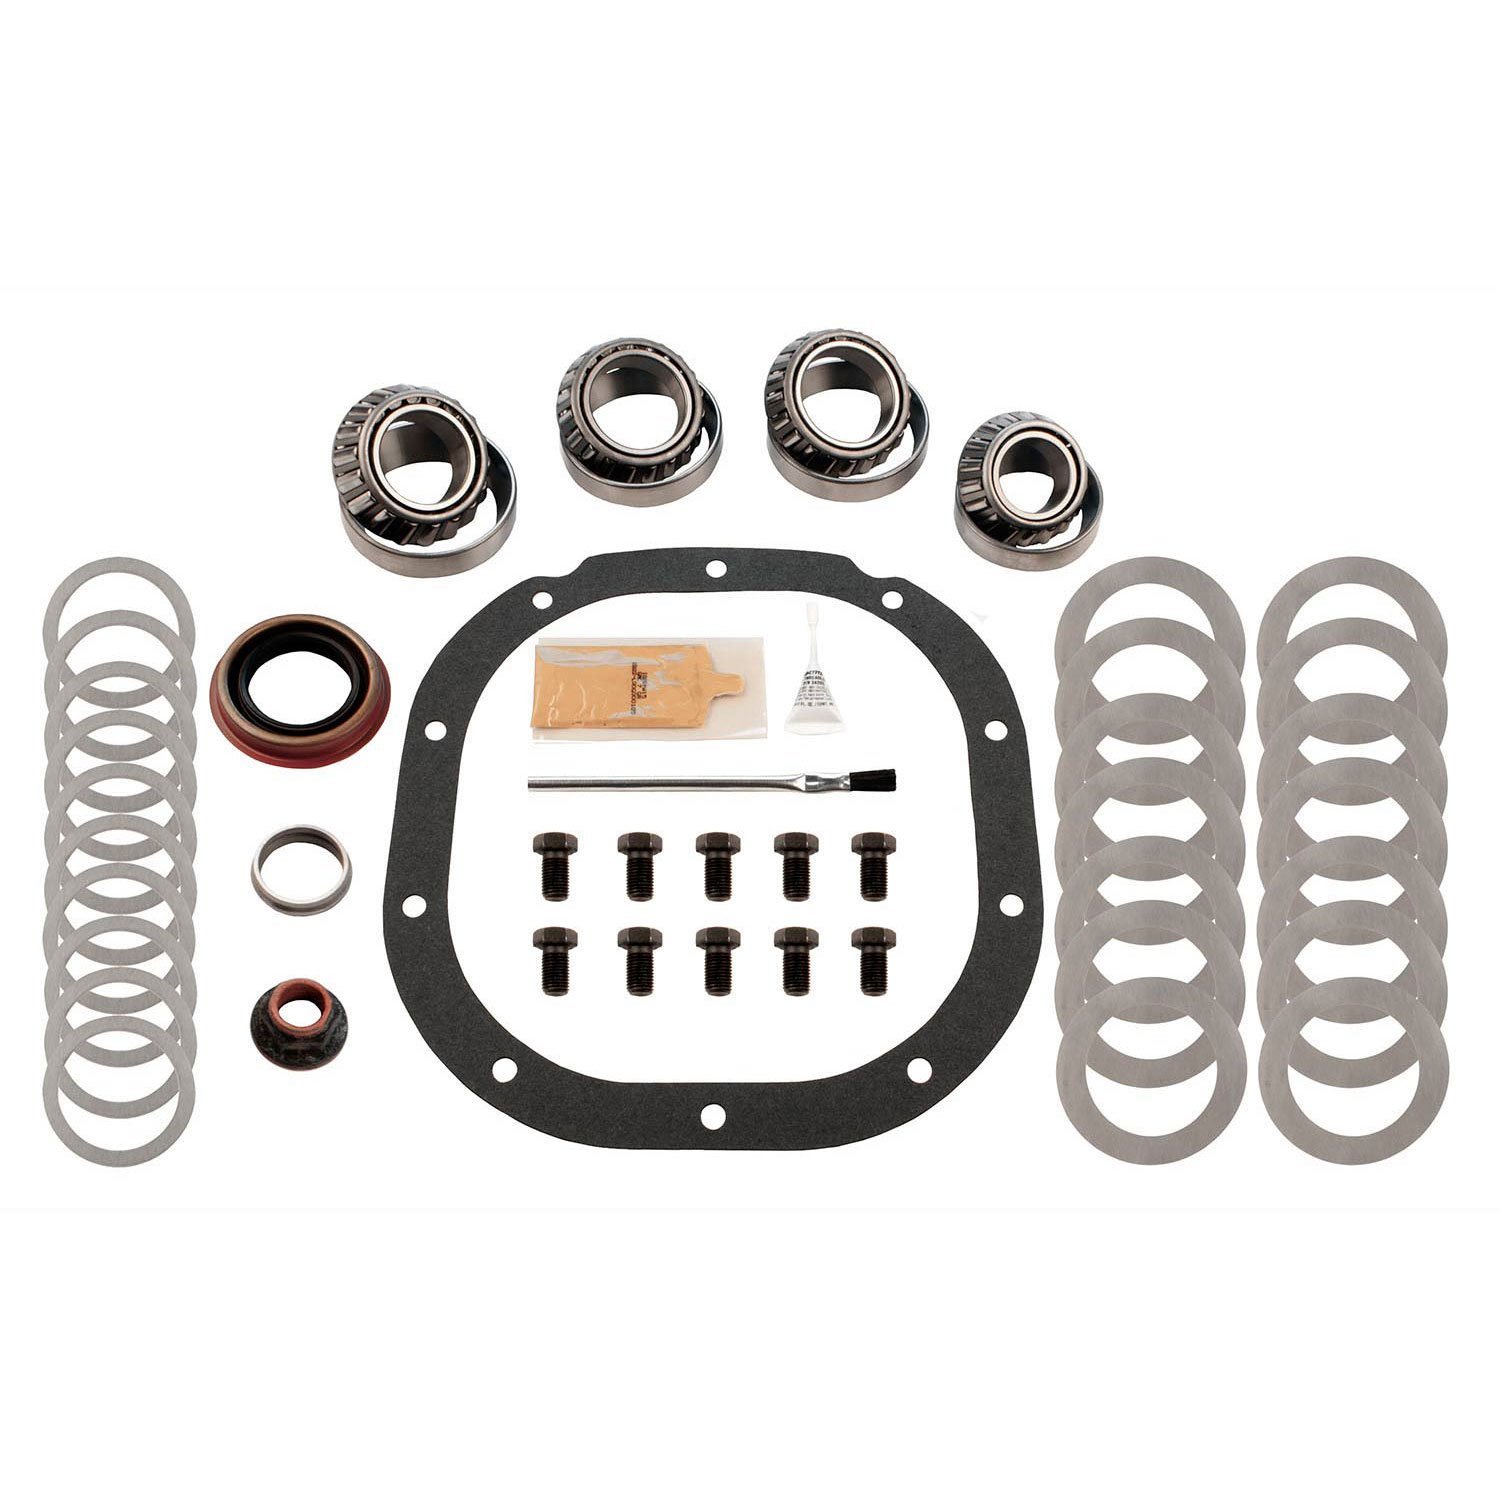 Differential Master Bearing Kit Ford 8.8 in. 10-bolt - Timken Bearings